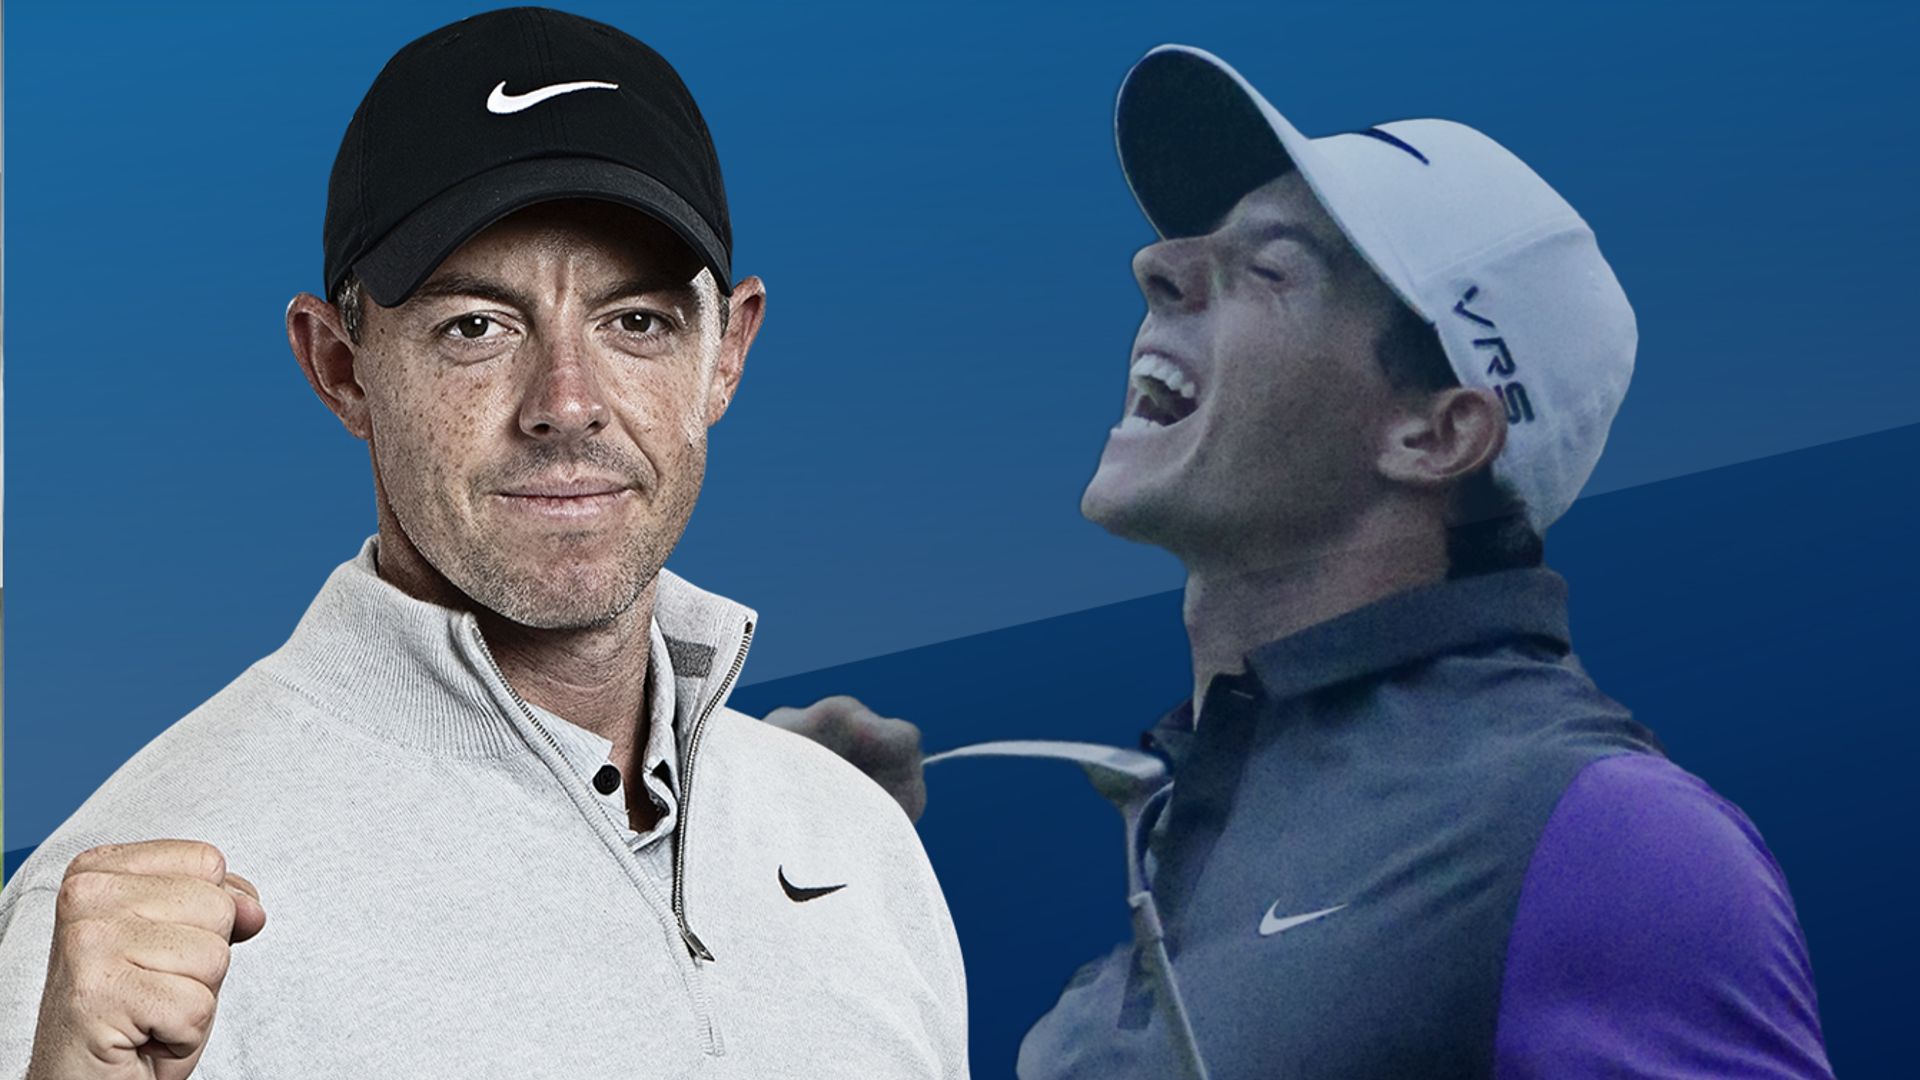 McIlroy's last major win, 10 years on: Valhalla to end title drought?